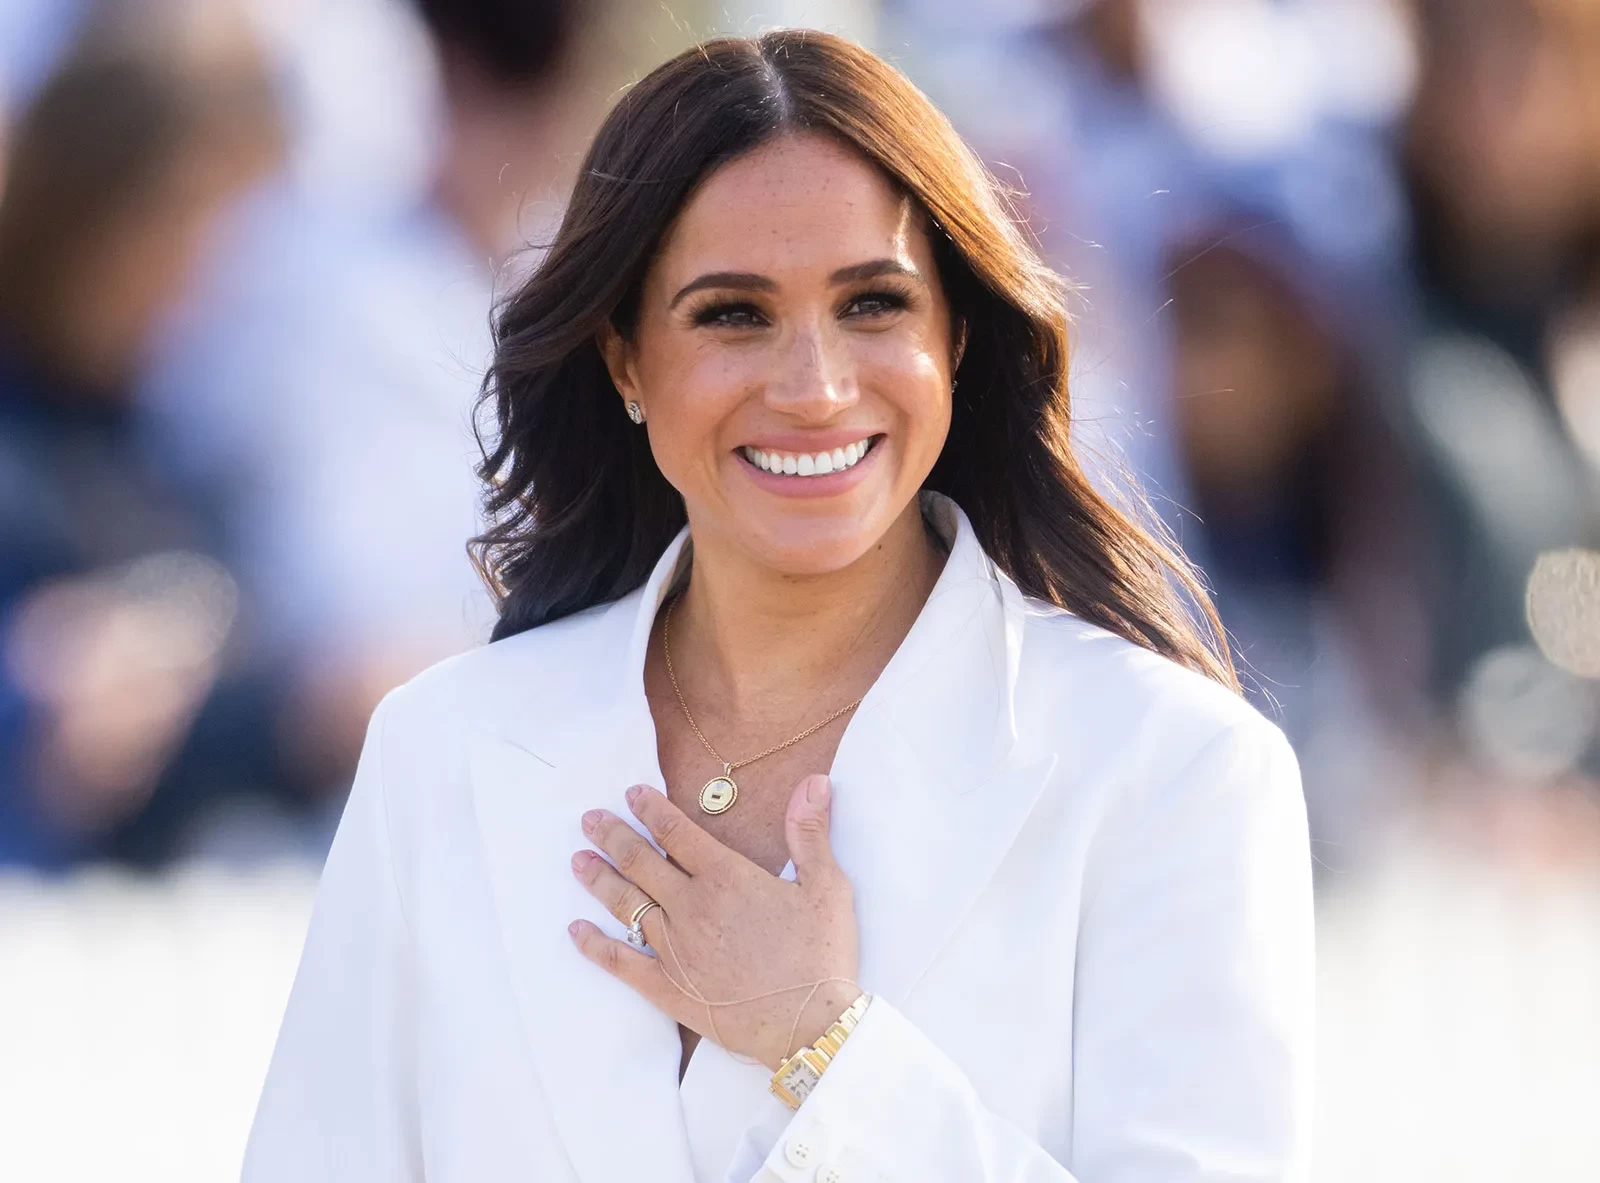 meghan-duchess-of-sussex-invictus-games-the-netherlands-2022-meghan-markle.webp